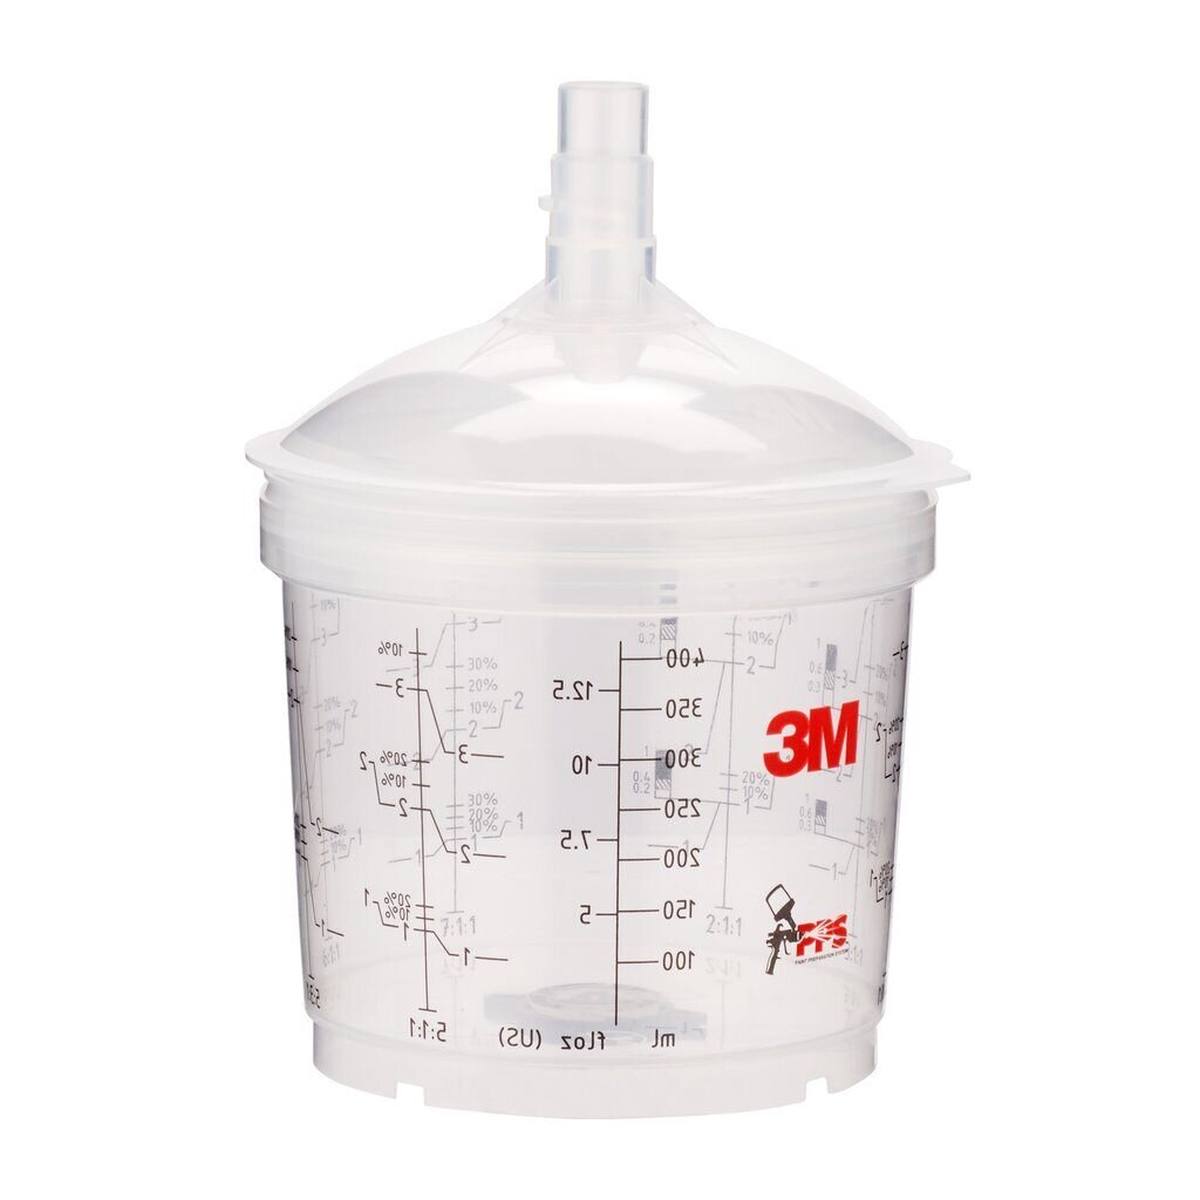 3M PPS Type V lid and cup kits, 0.4l, 200u, 50 cups, 50 lids #16152